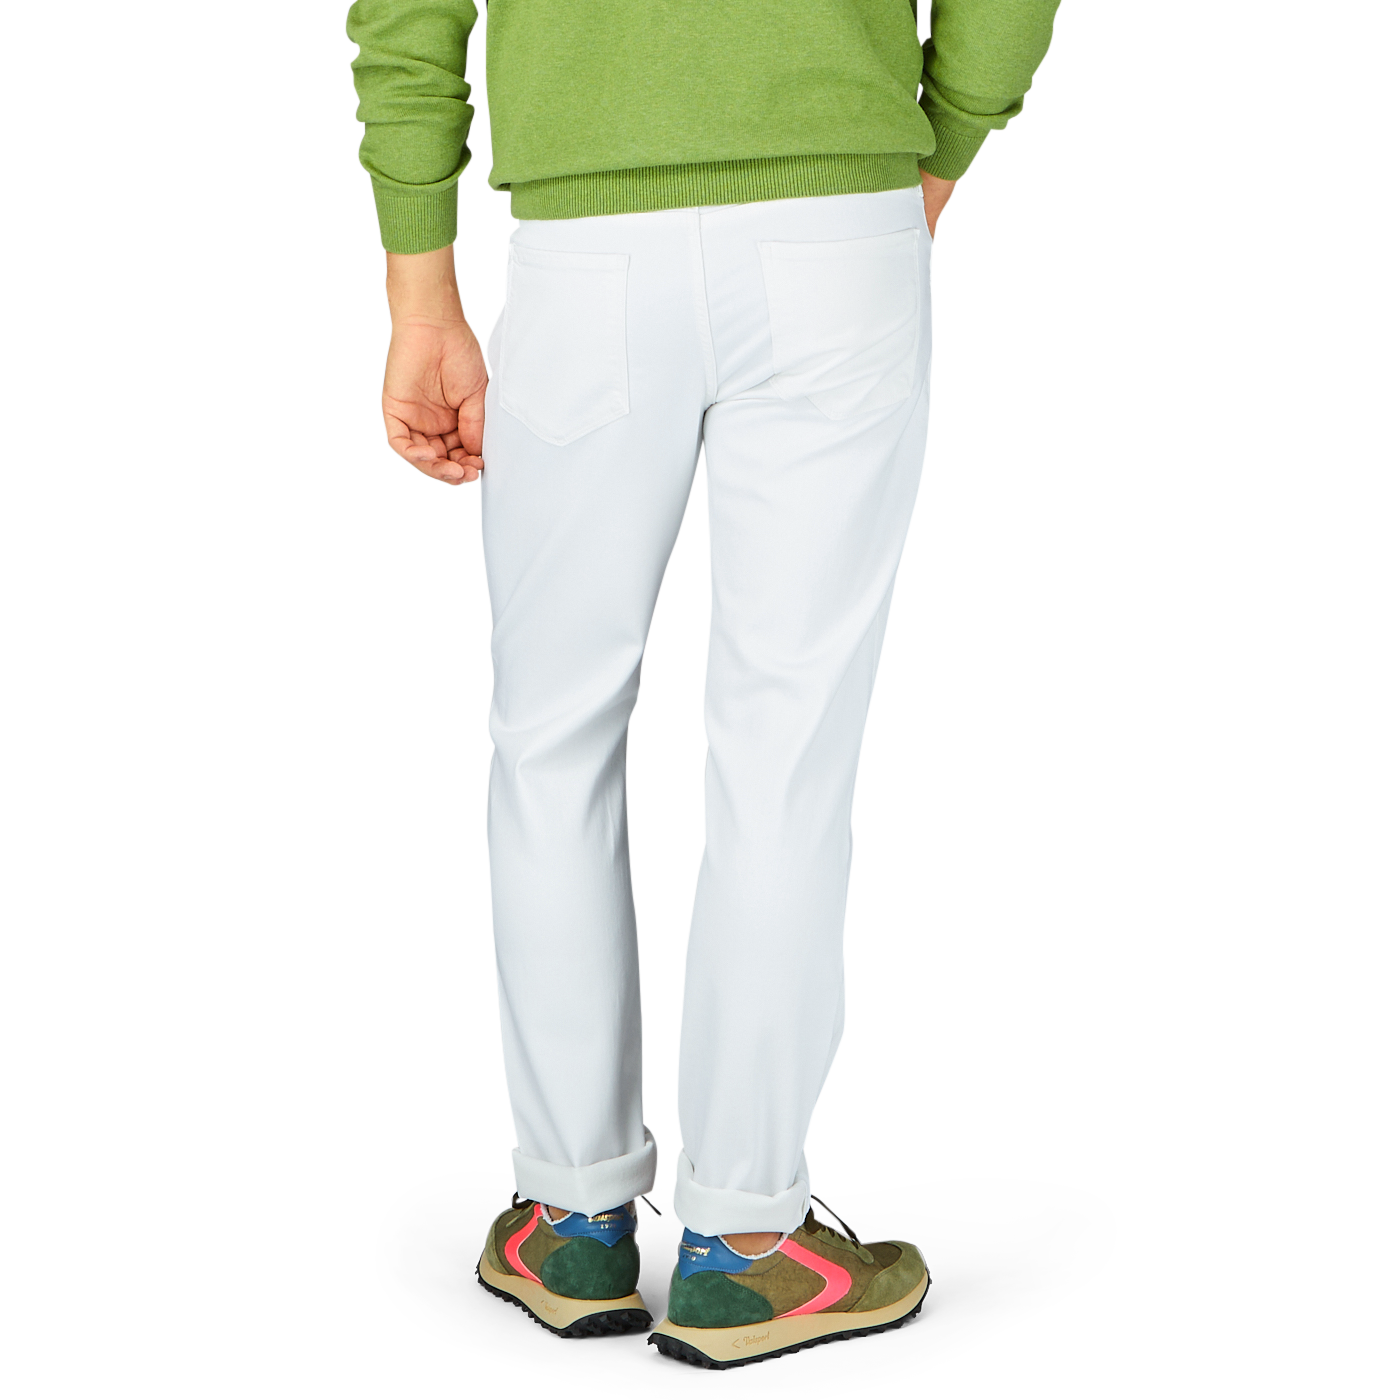 Person wearing white Paige Icecap White Cotton Transcend Federal Slim Jeans and colorful sneakers standing against a neutral background.